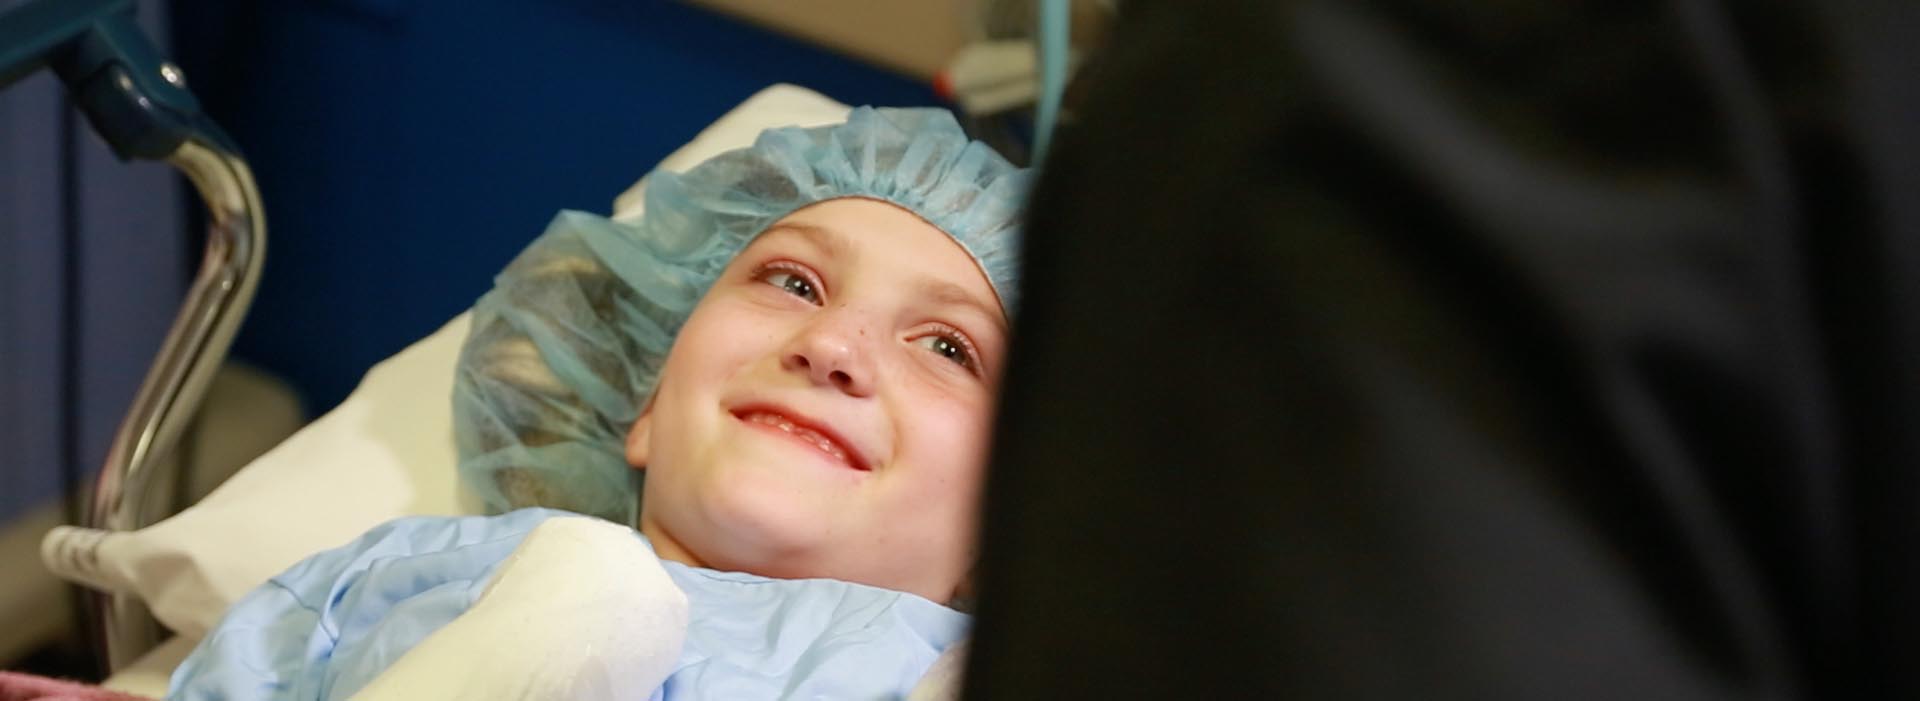 A young child patient smiles to someone out of frame